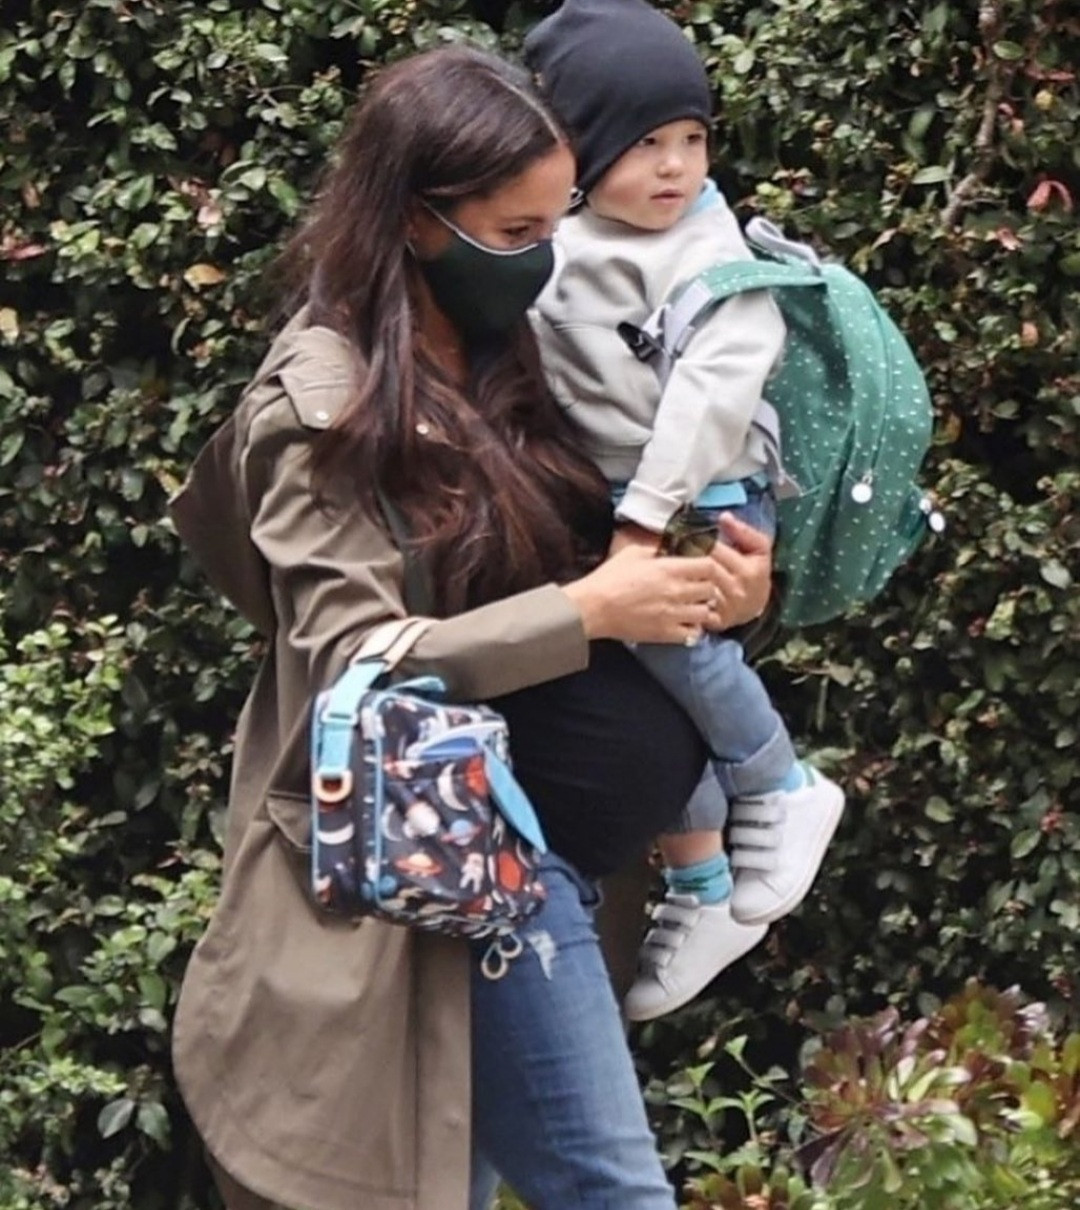 Heavily pregnant Meghan Markle pictured taking son Archie to school (photos)